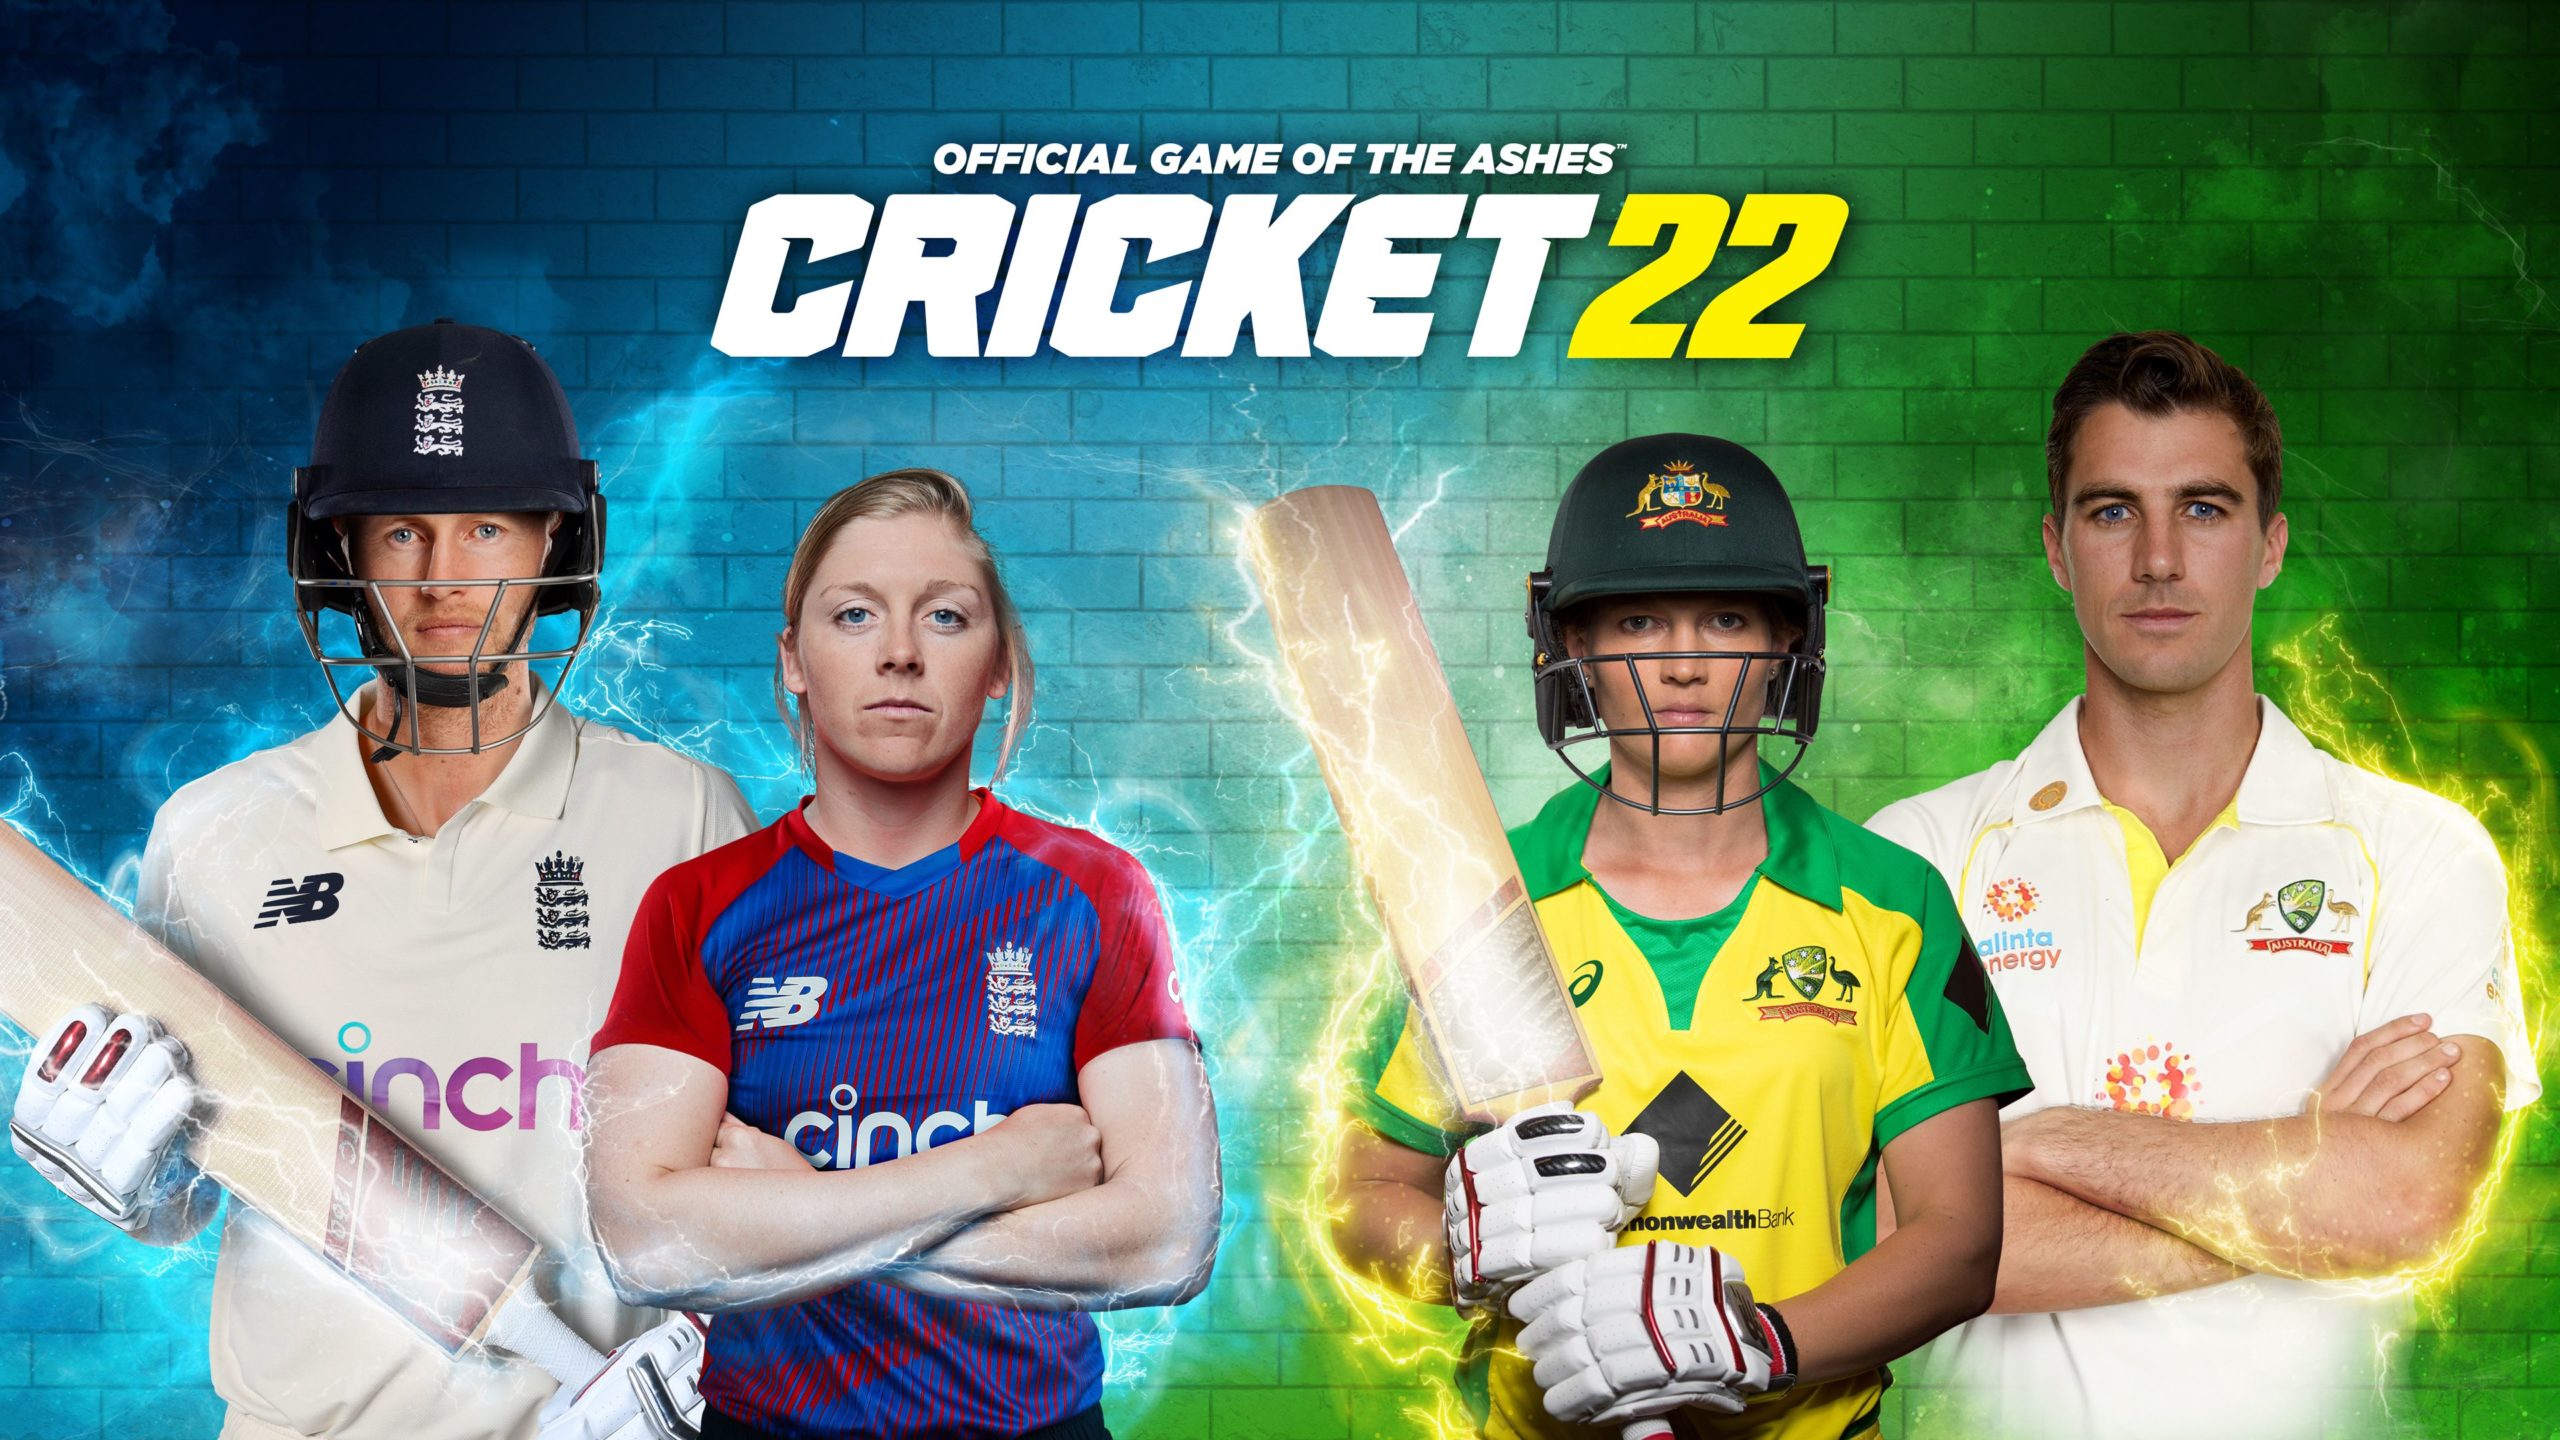 Cricket Australia: Cricket 22 “The Official Game of The Ashes” in store now